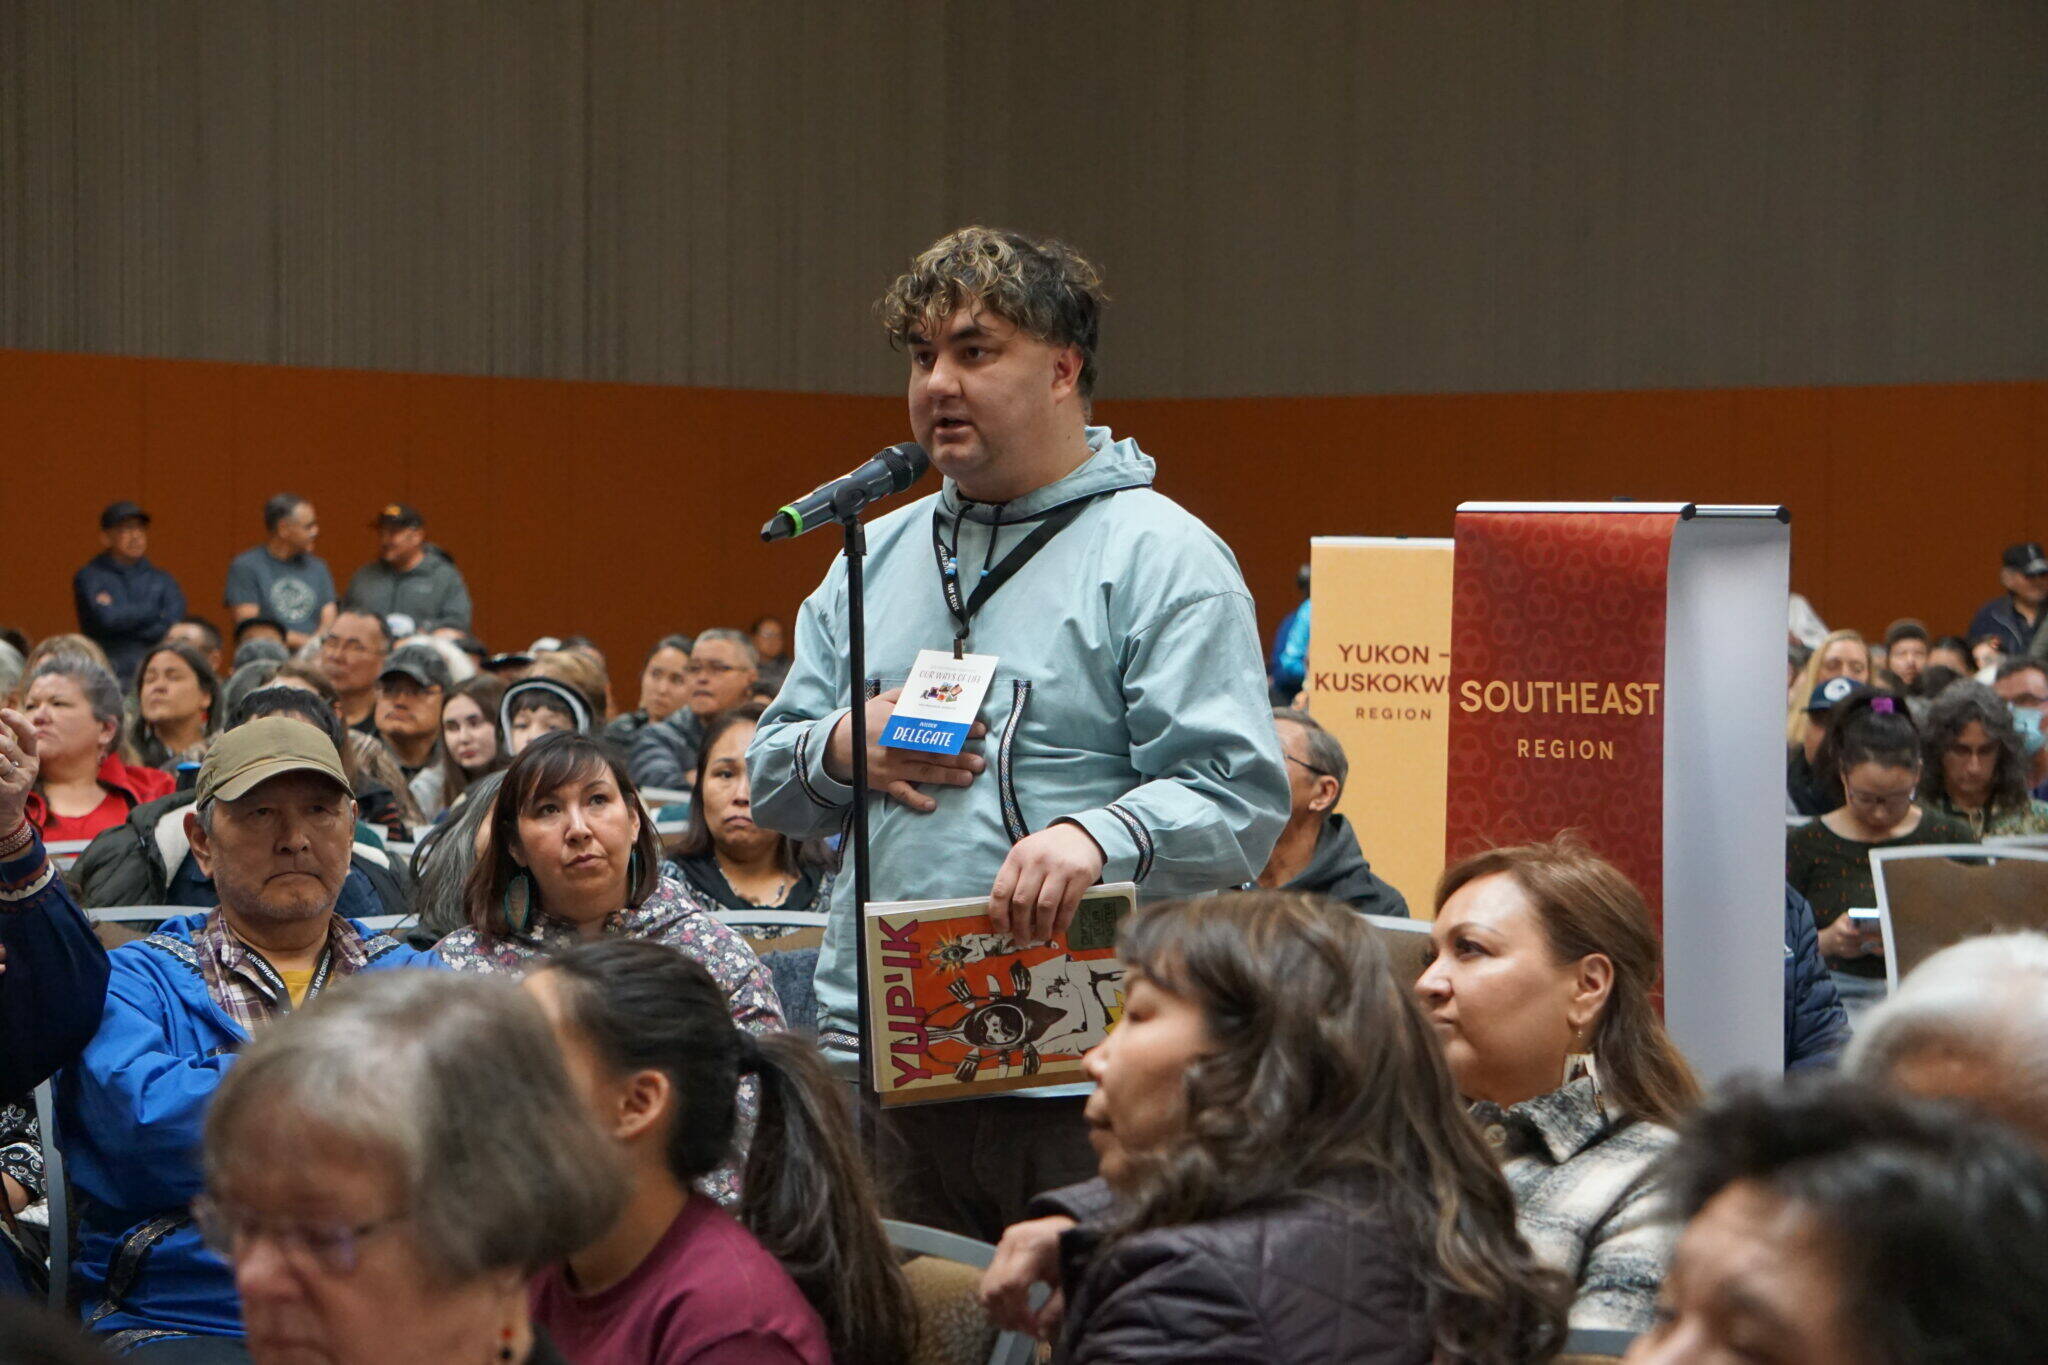 Jonathan Samuelson, chair of the Kuskokwim River Inter-Tribal Fish Commission, speaks Friday at the Alaska Convention of Natives convention about the effects of salmon crashes in his region. (Photo by Yereth Rosen/Alaska Beacon)